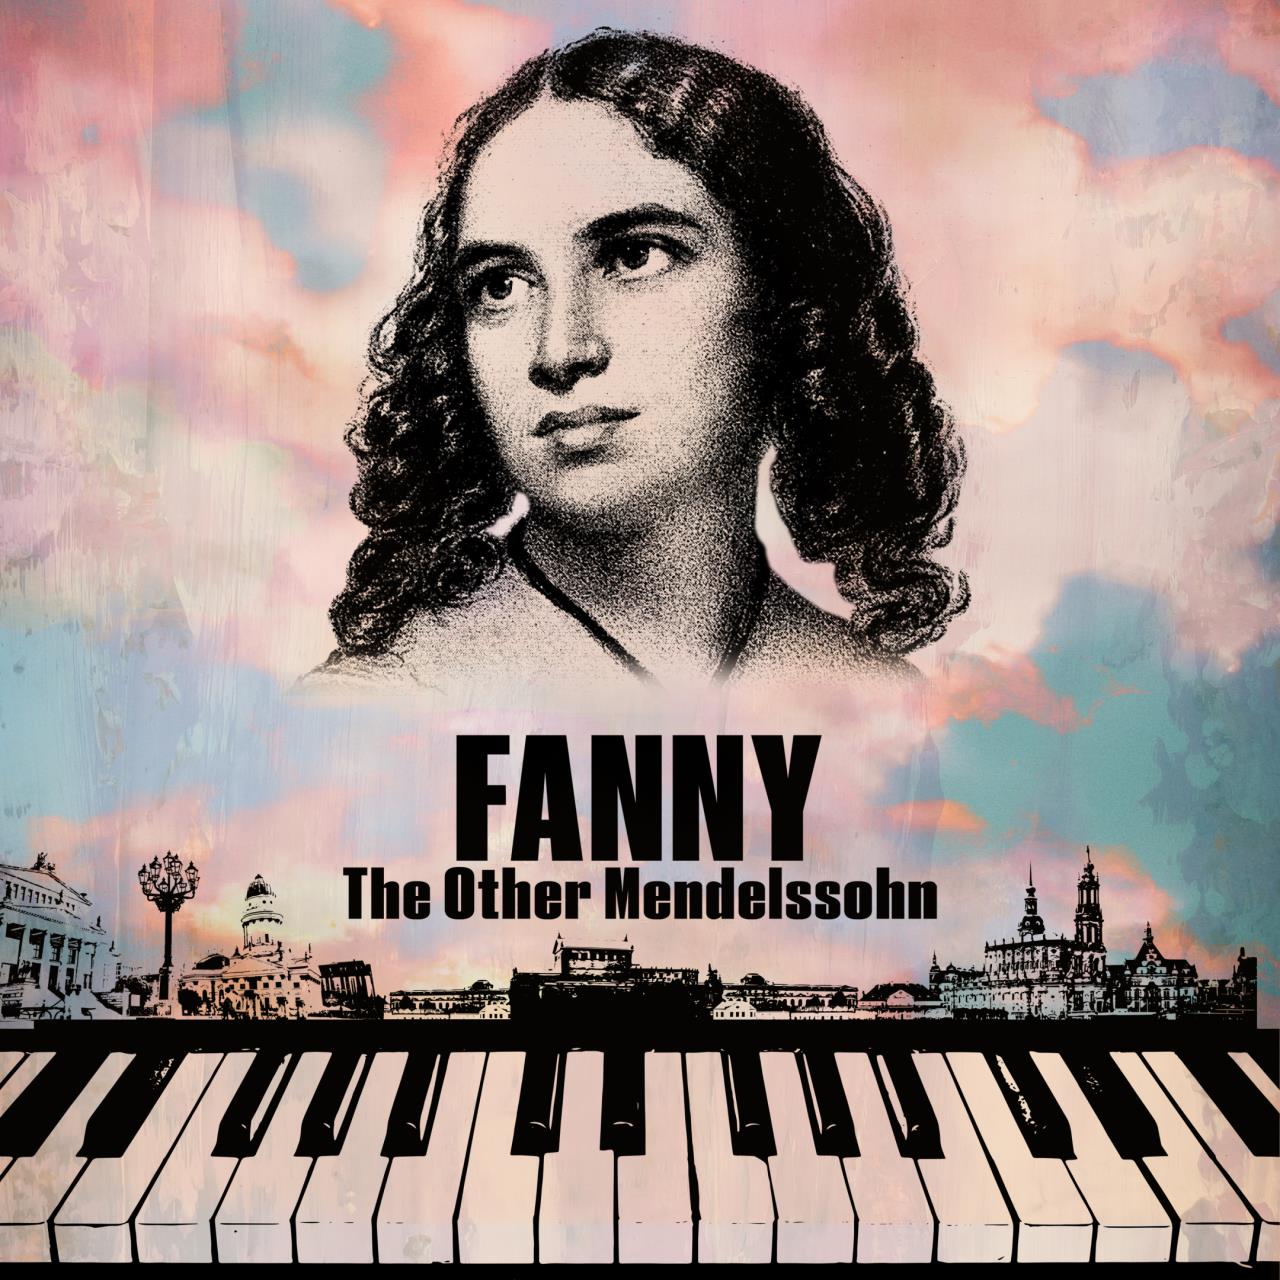 Fanny: The Other Mendelssohn - Screening & Piano Premiere